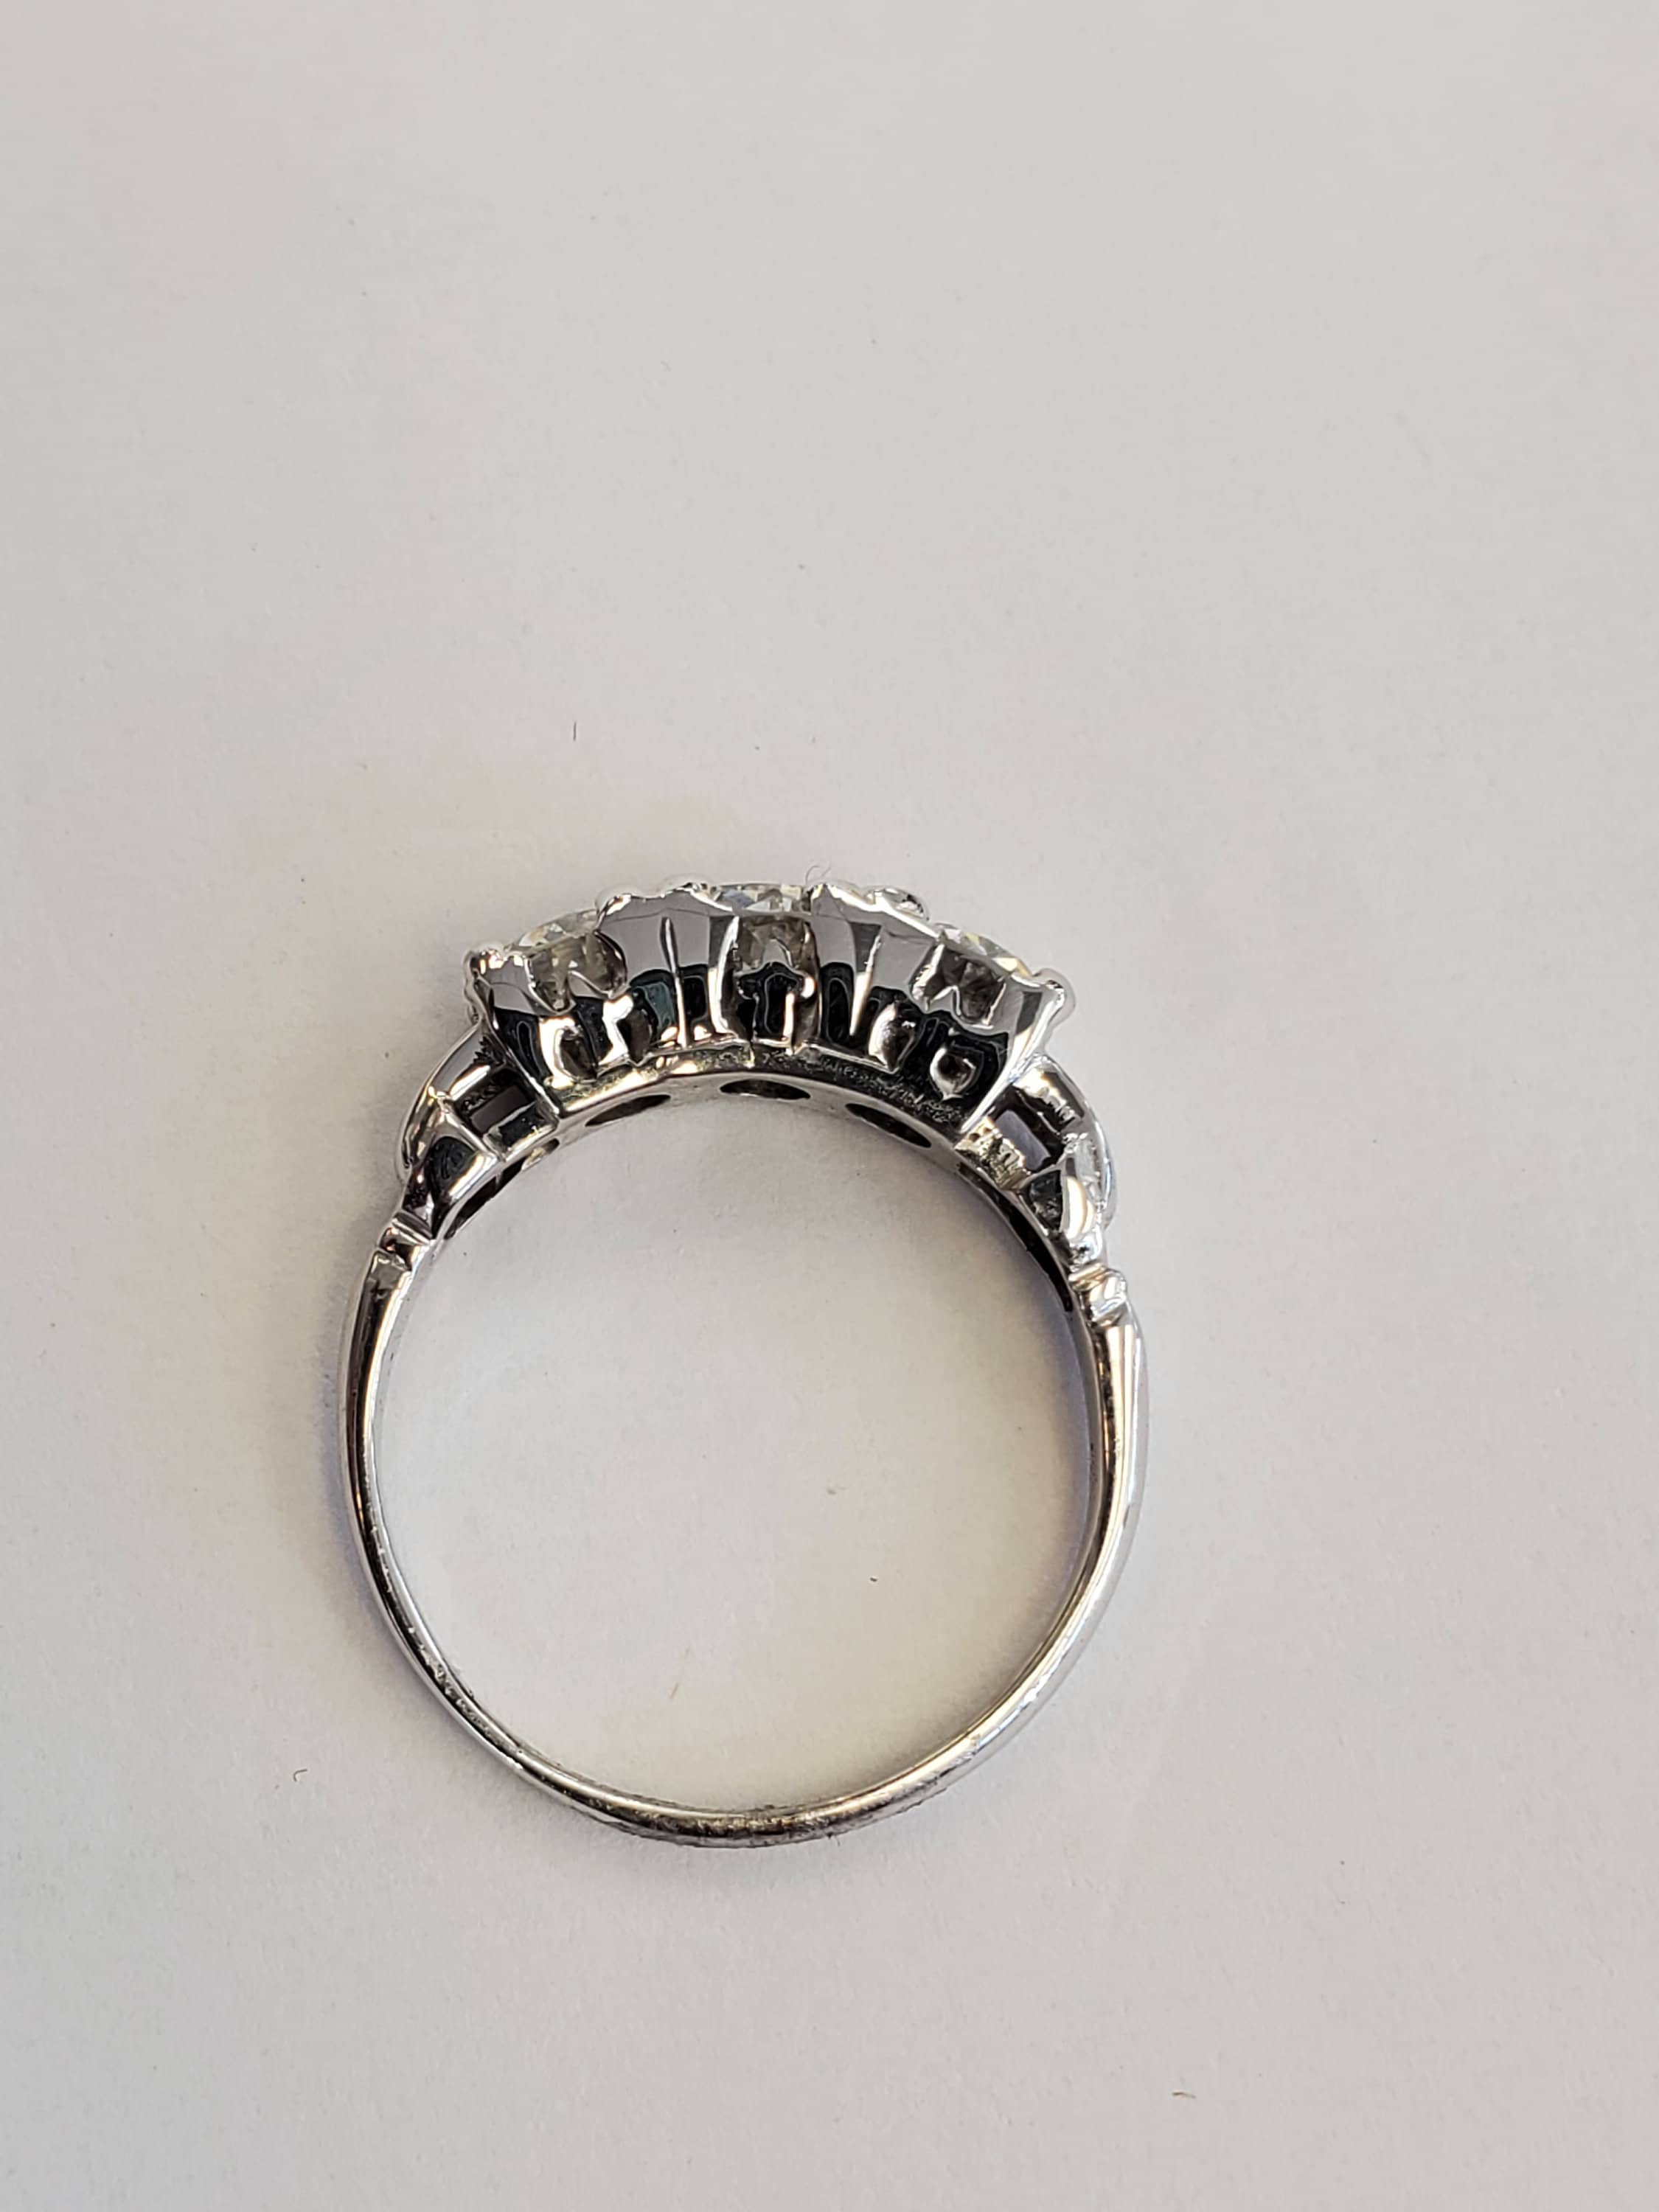 Product Image for Vintage 18k White Gold Three Diamond Old European Cut .98cttw Ring size 5 1/4